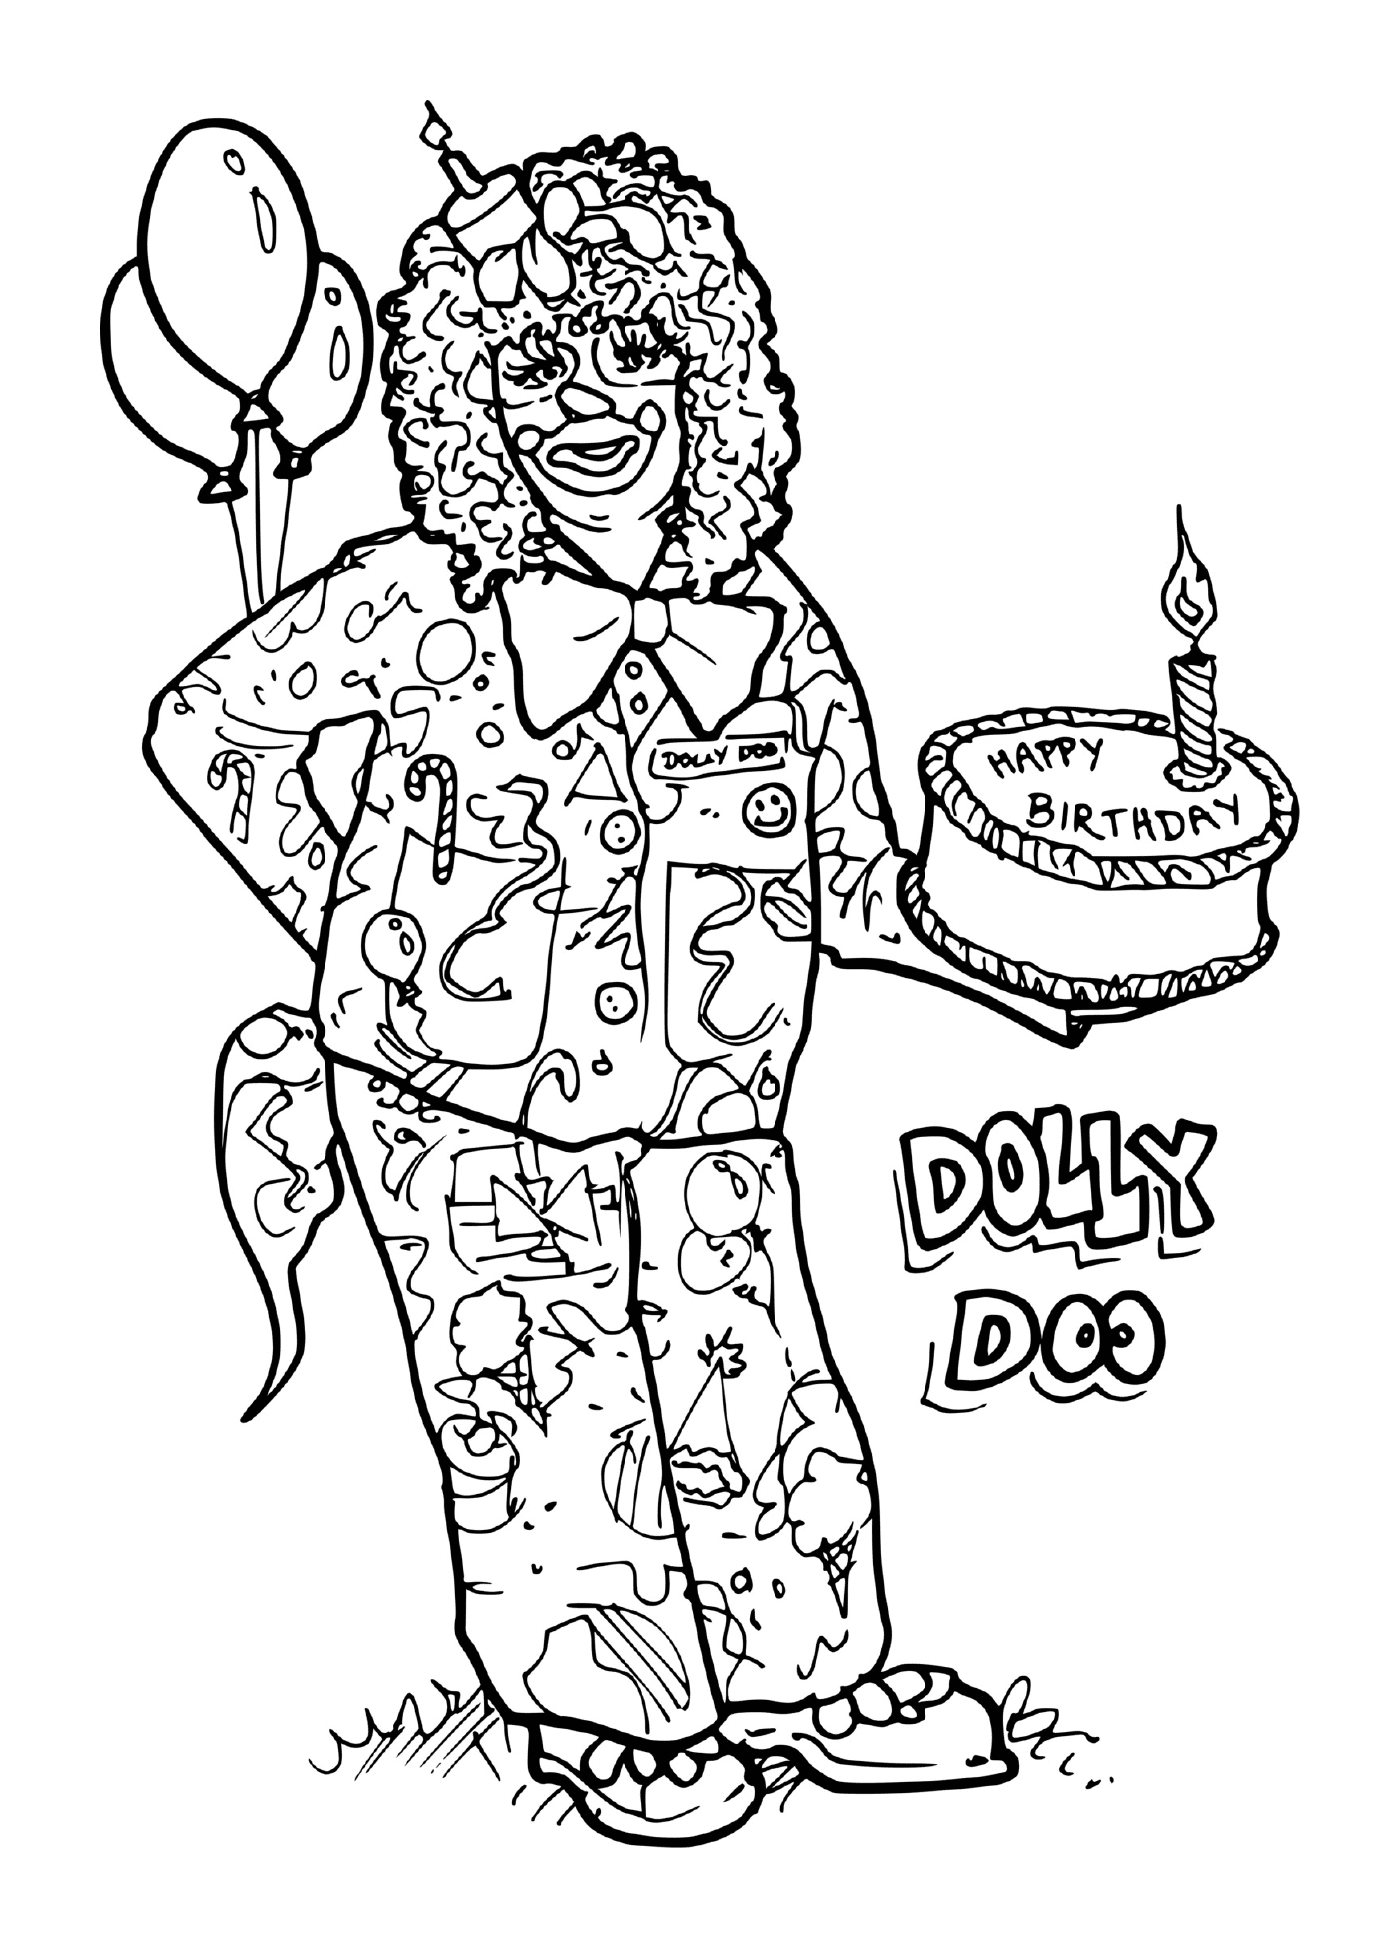  A clown with a birthday cake 